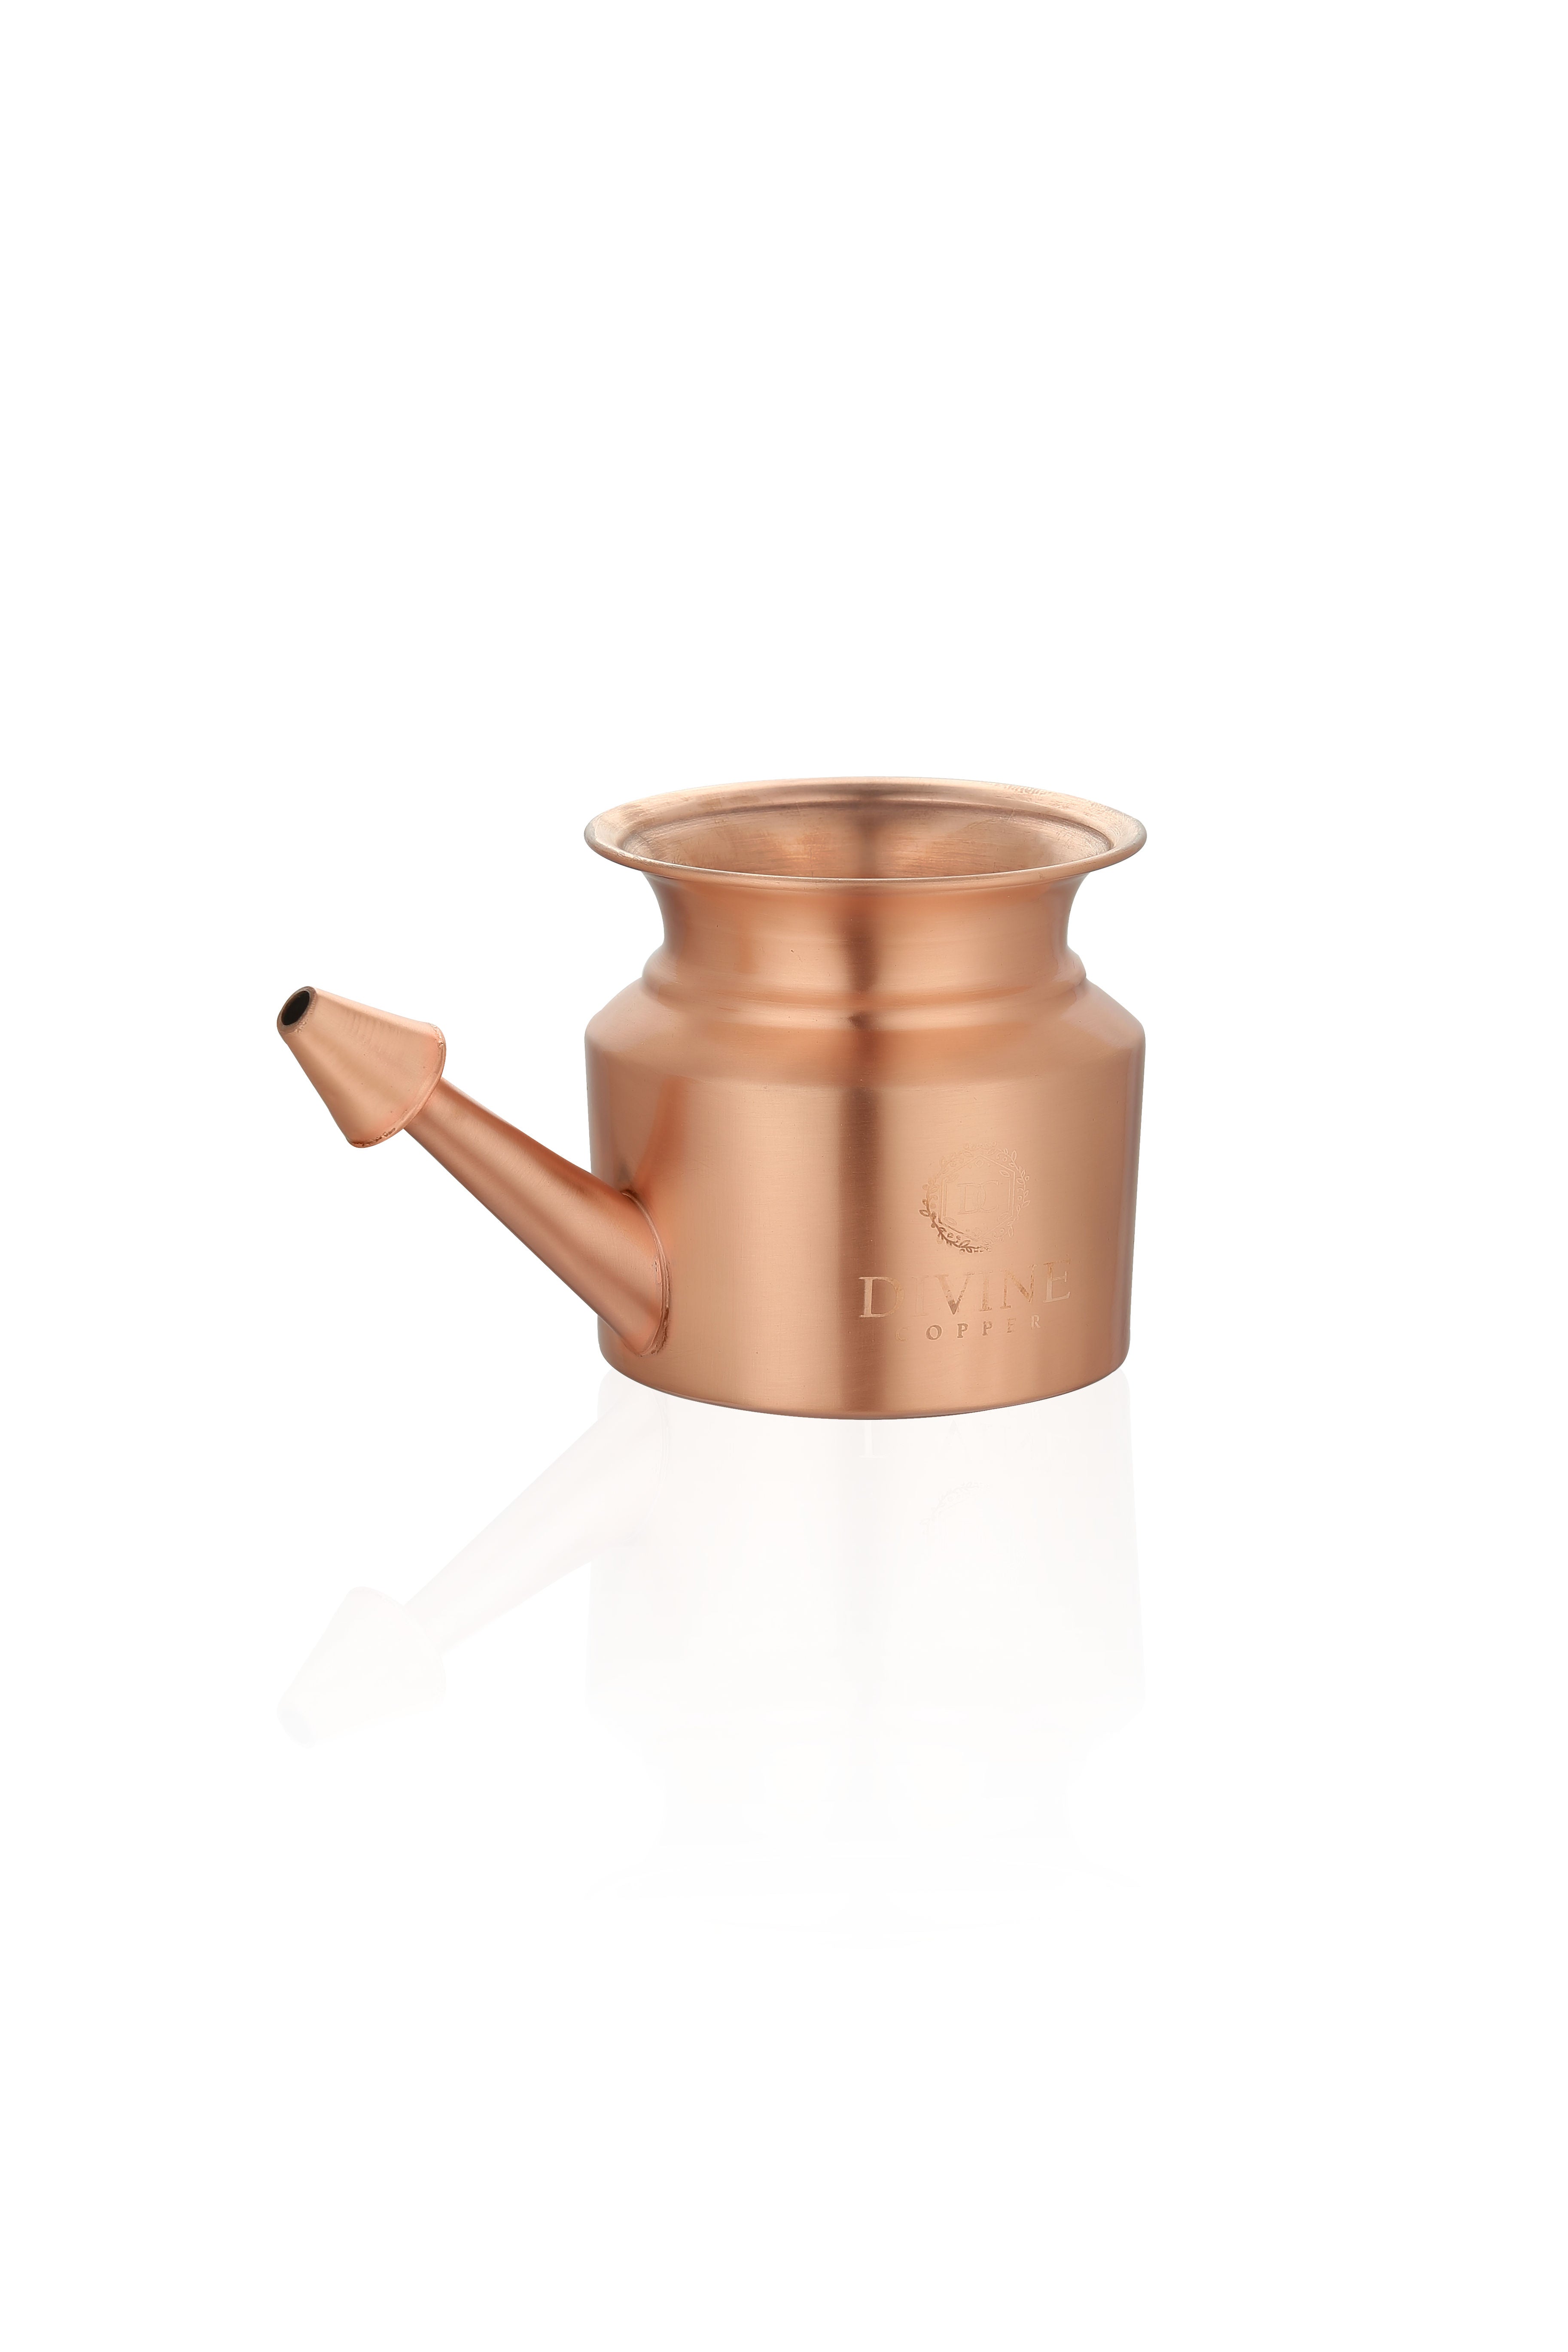 Pure copper Ayurveda Jala Neti Pot for Sinus, Nose Irrigation and Cleaning